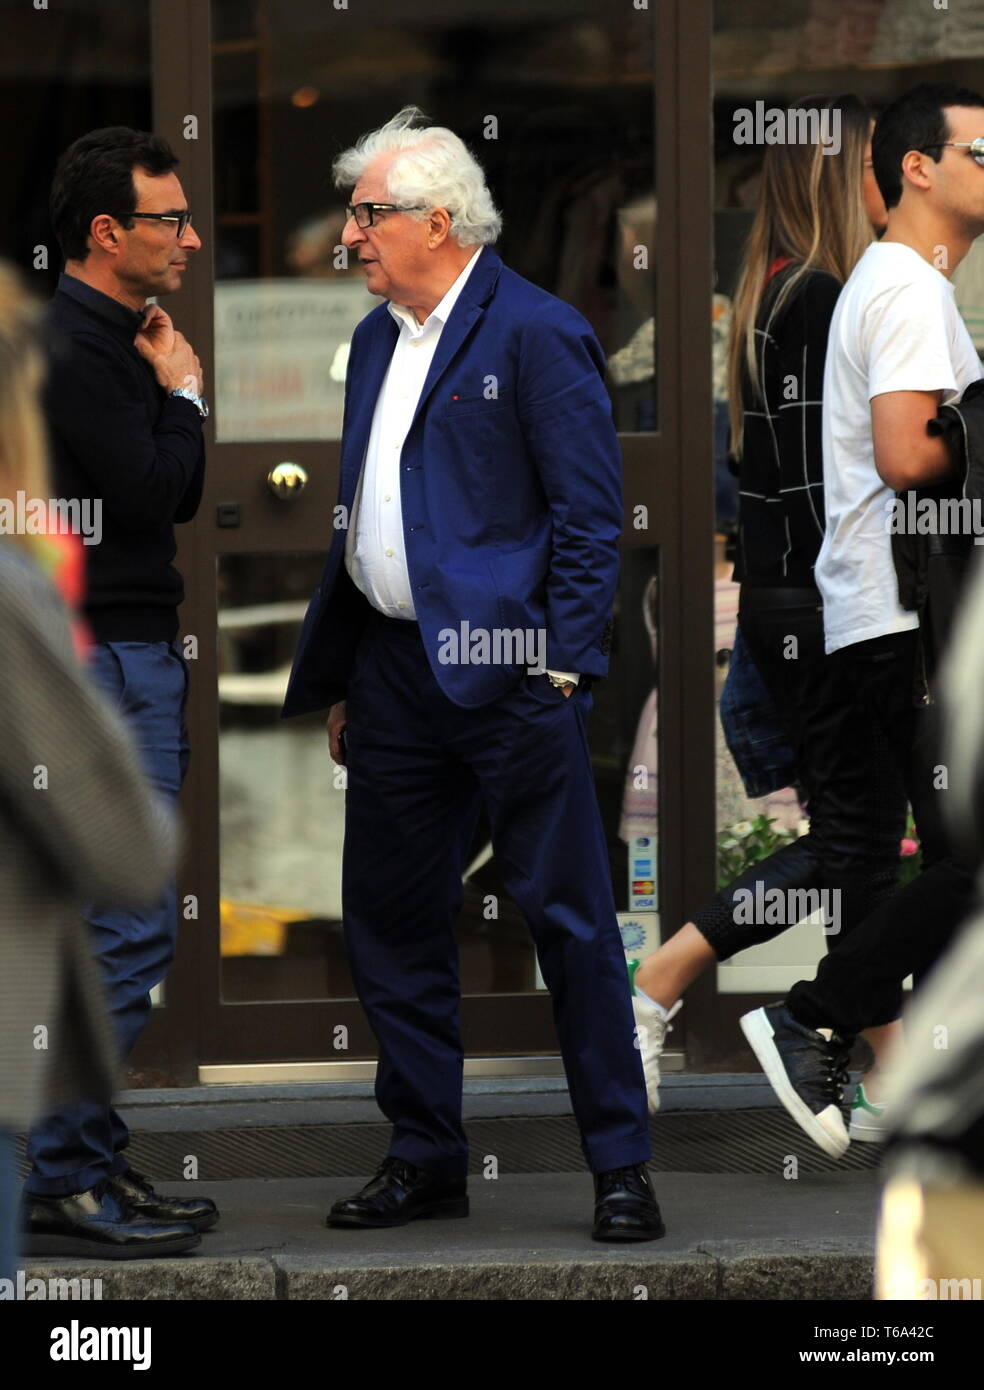 Milan, Patrizio Bertelli in the center Patrizio Bertelli, the patron of the  "Prada" brand together with his wife Miuccia, surprised at the exit of the  restaurant while talking to a friend, then